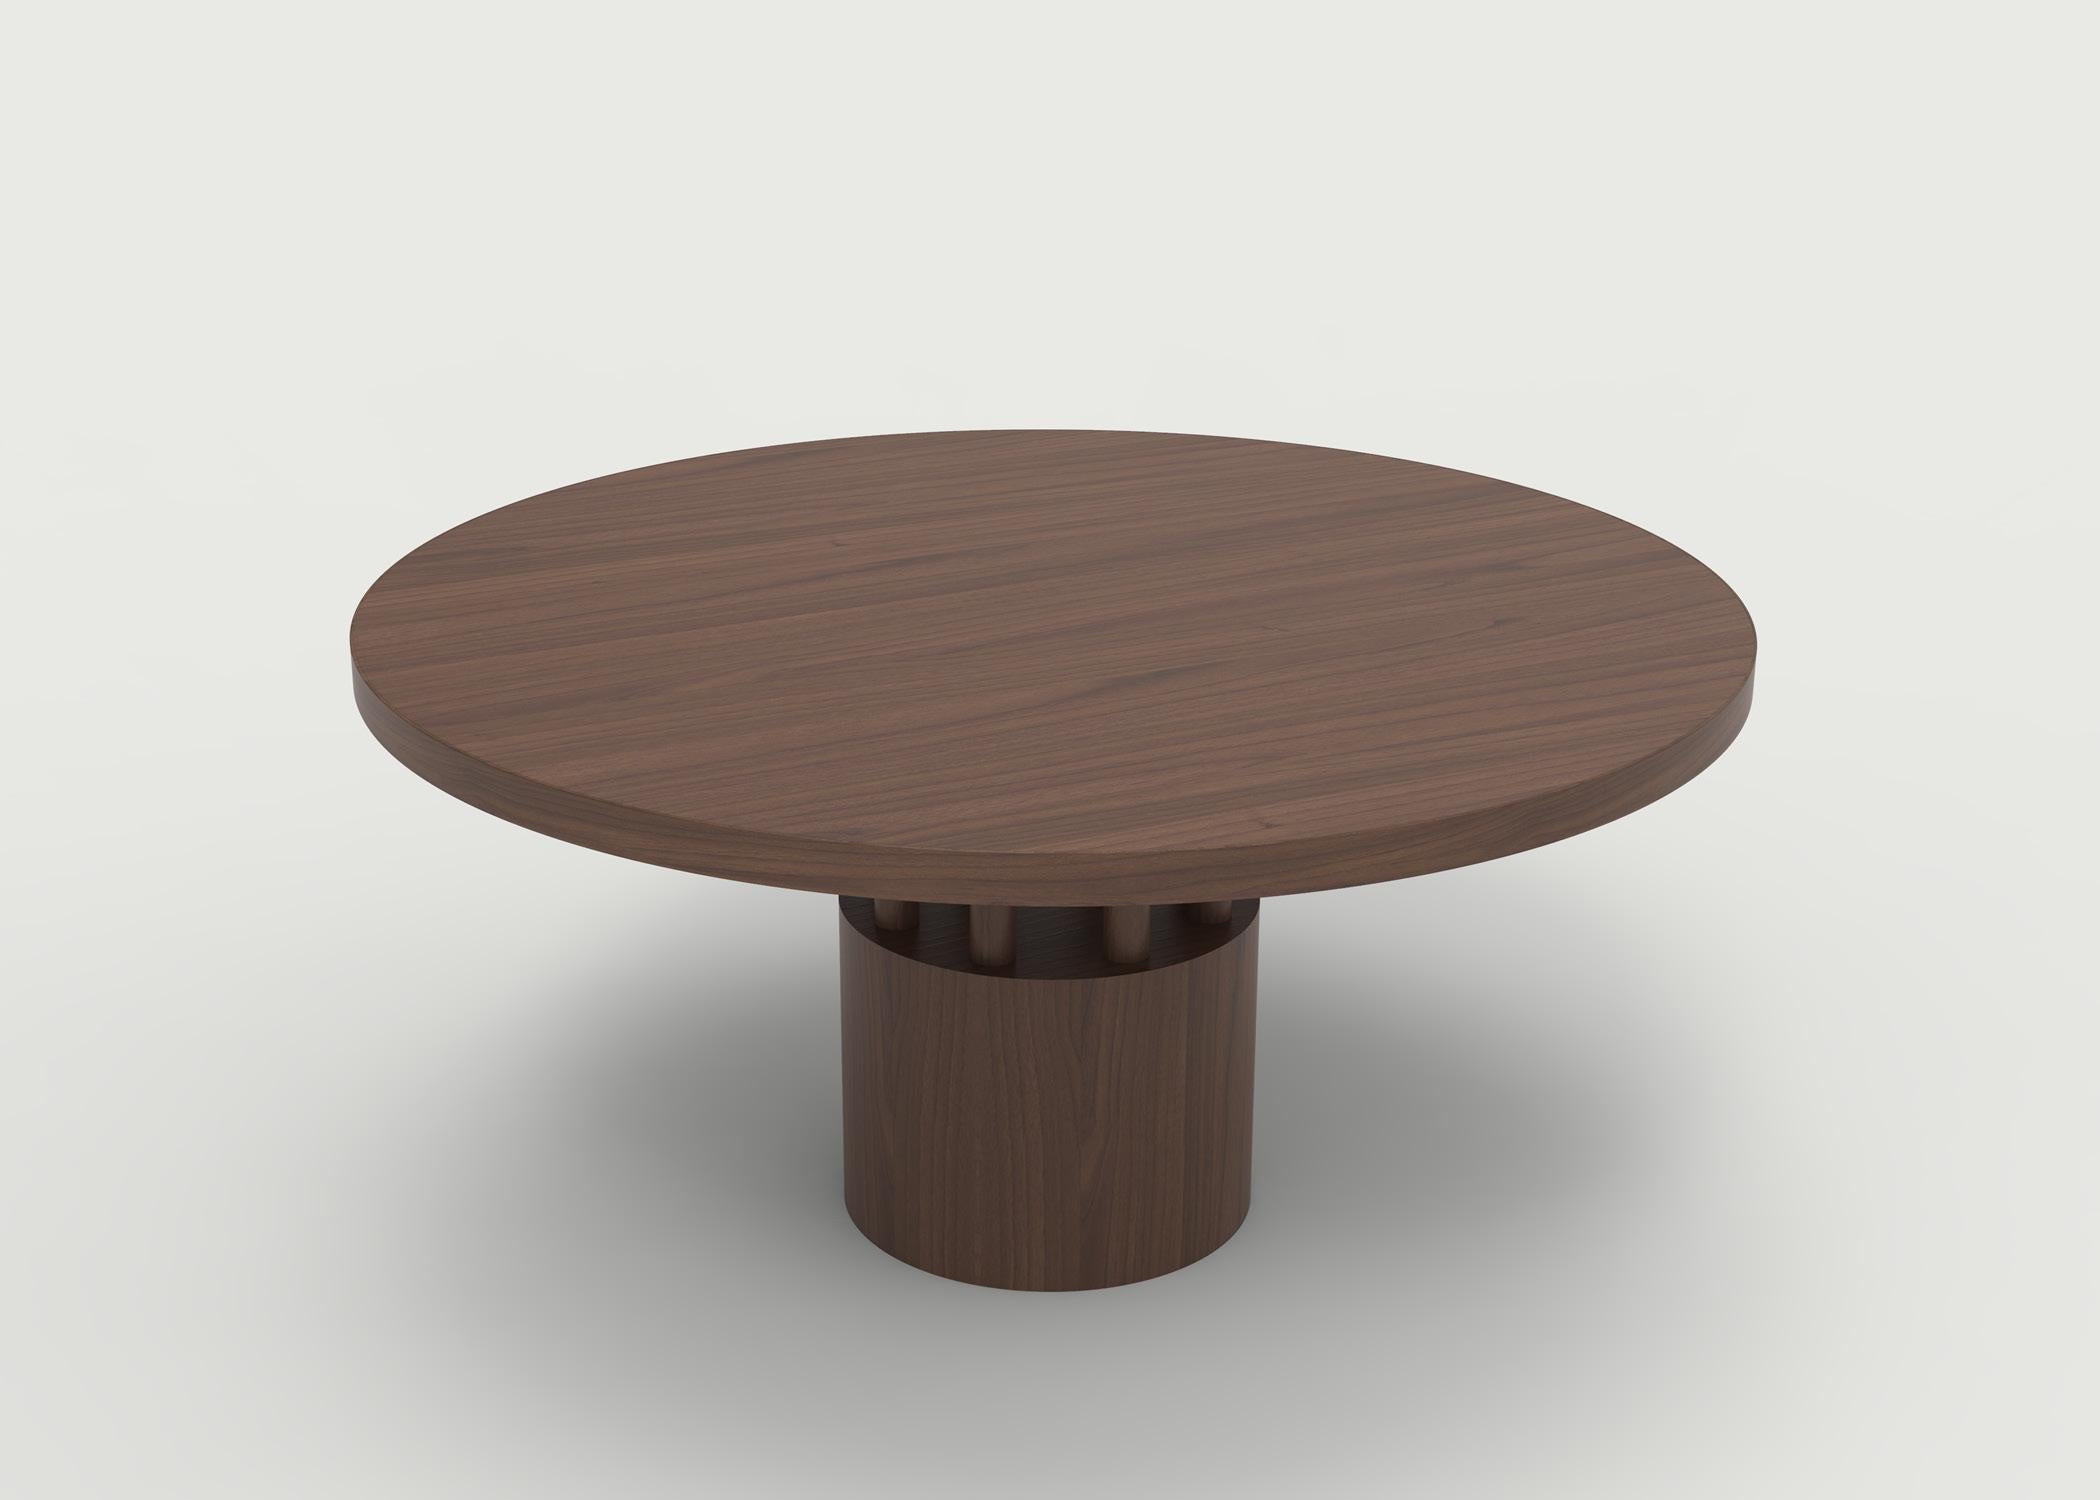 The Fulton dining table is the elder to our Benson coffee table - round top with carefully selected wood grain to feature the beauty of the species. The base and posts underneath give an artistic and exquisite look to a very functional piece.

Price